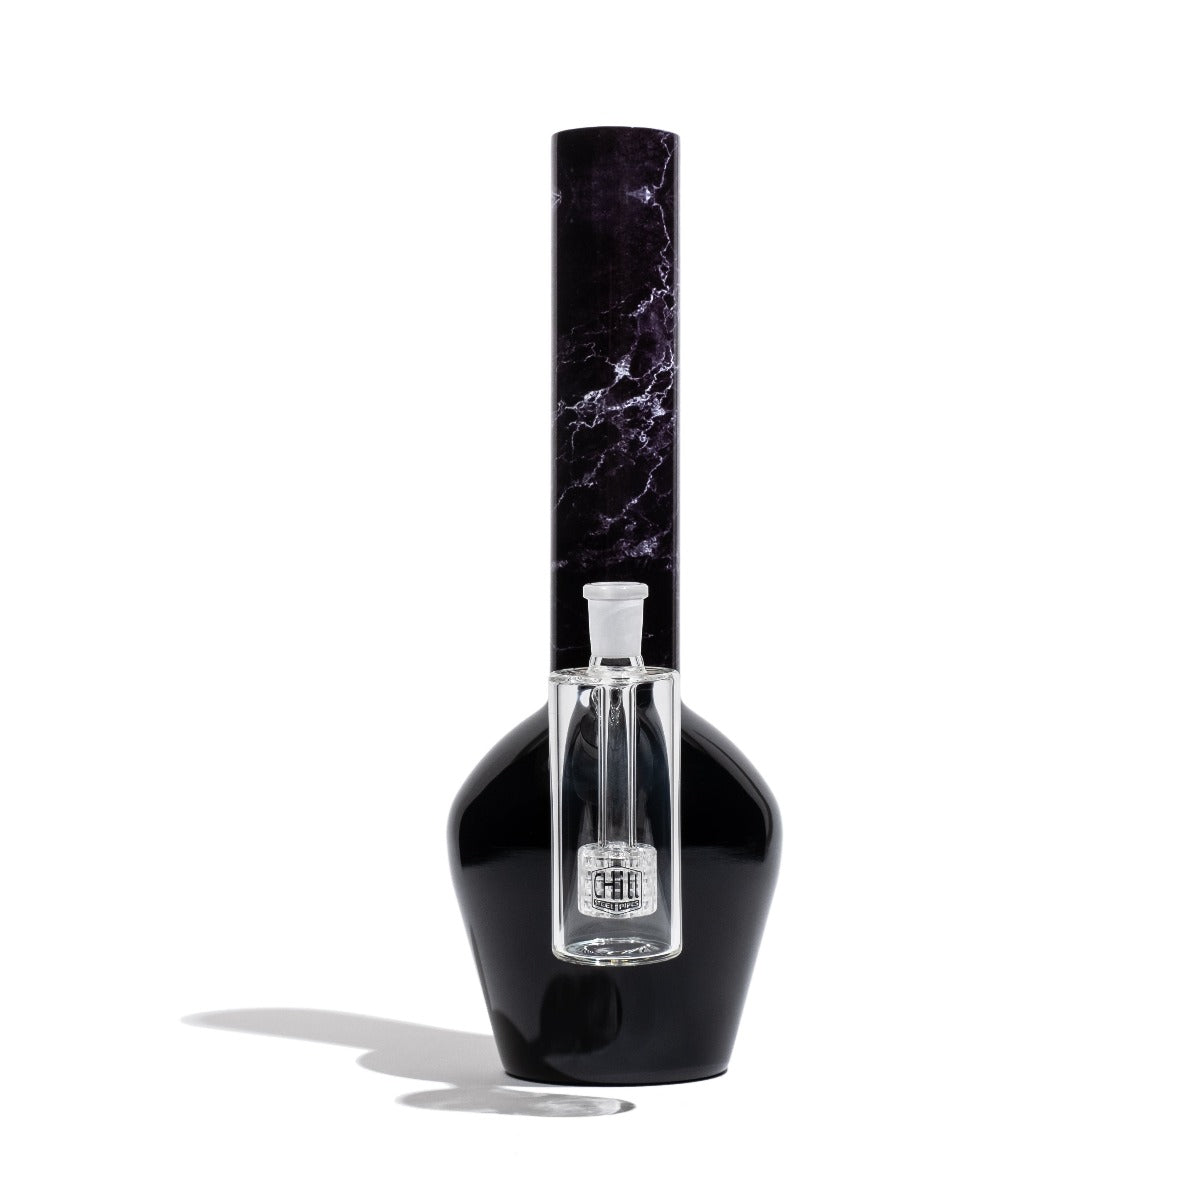 Chill Glass Ash Catcher with Matrix Perc, sleek black design, front view on white background